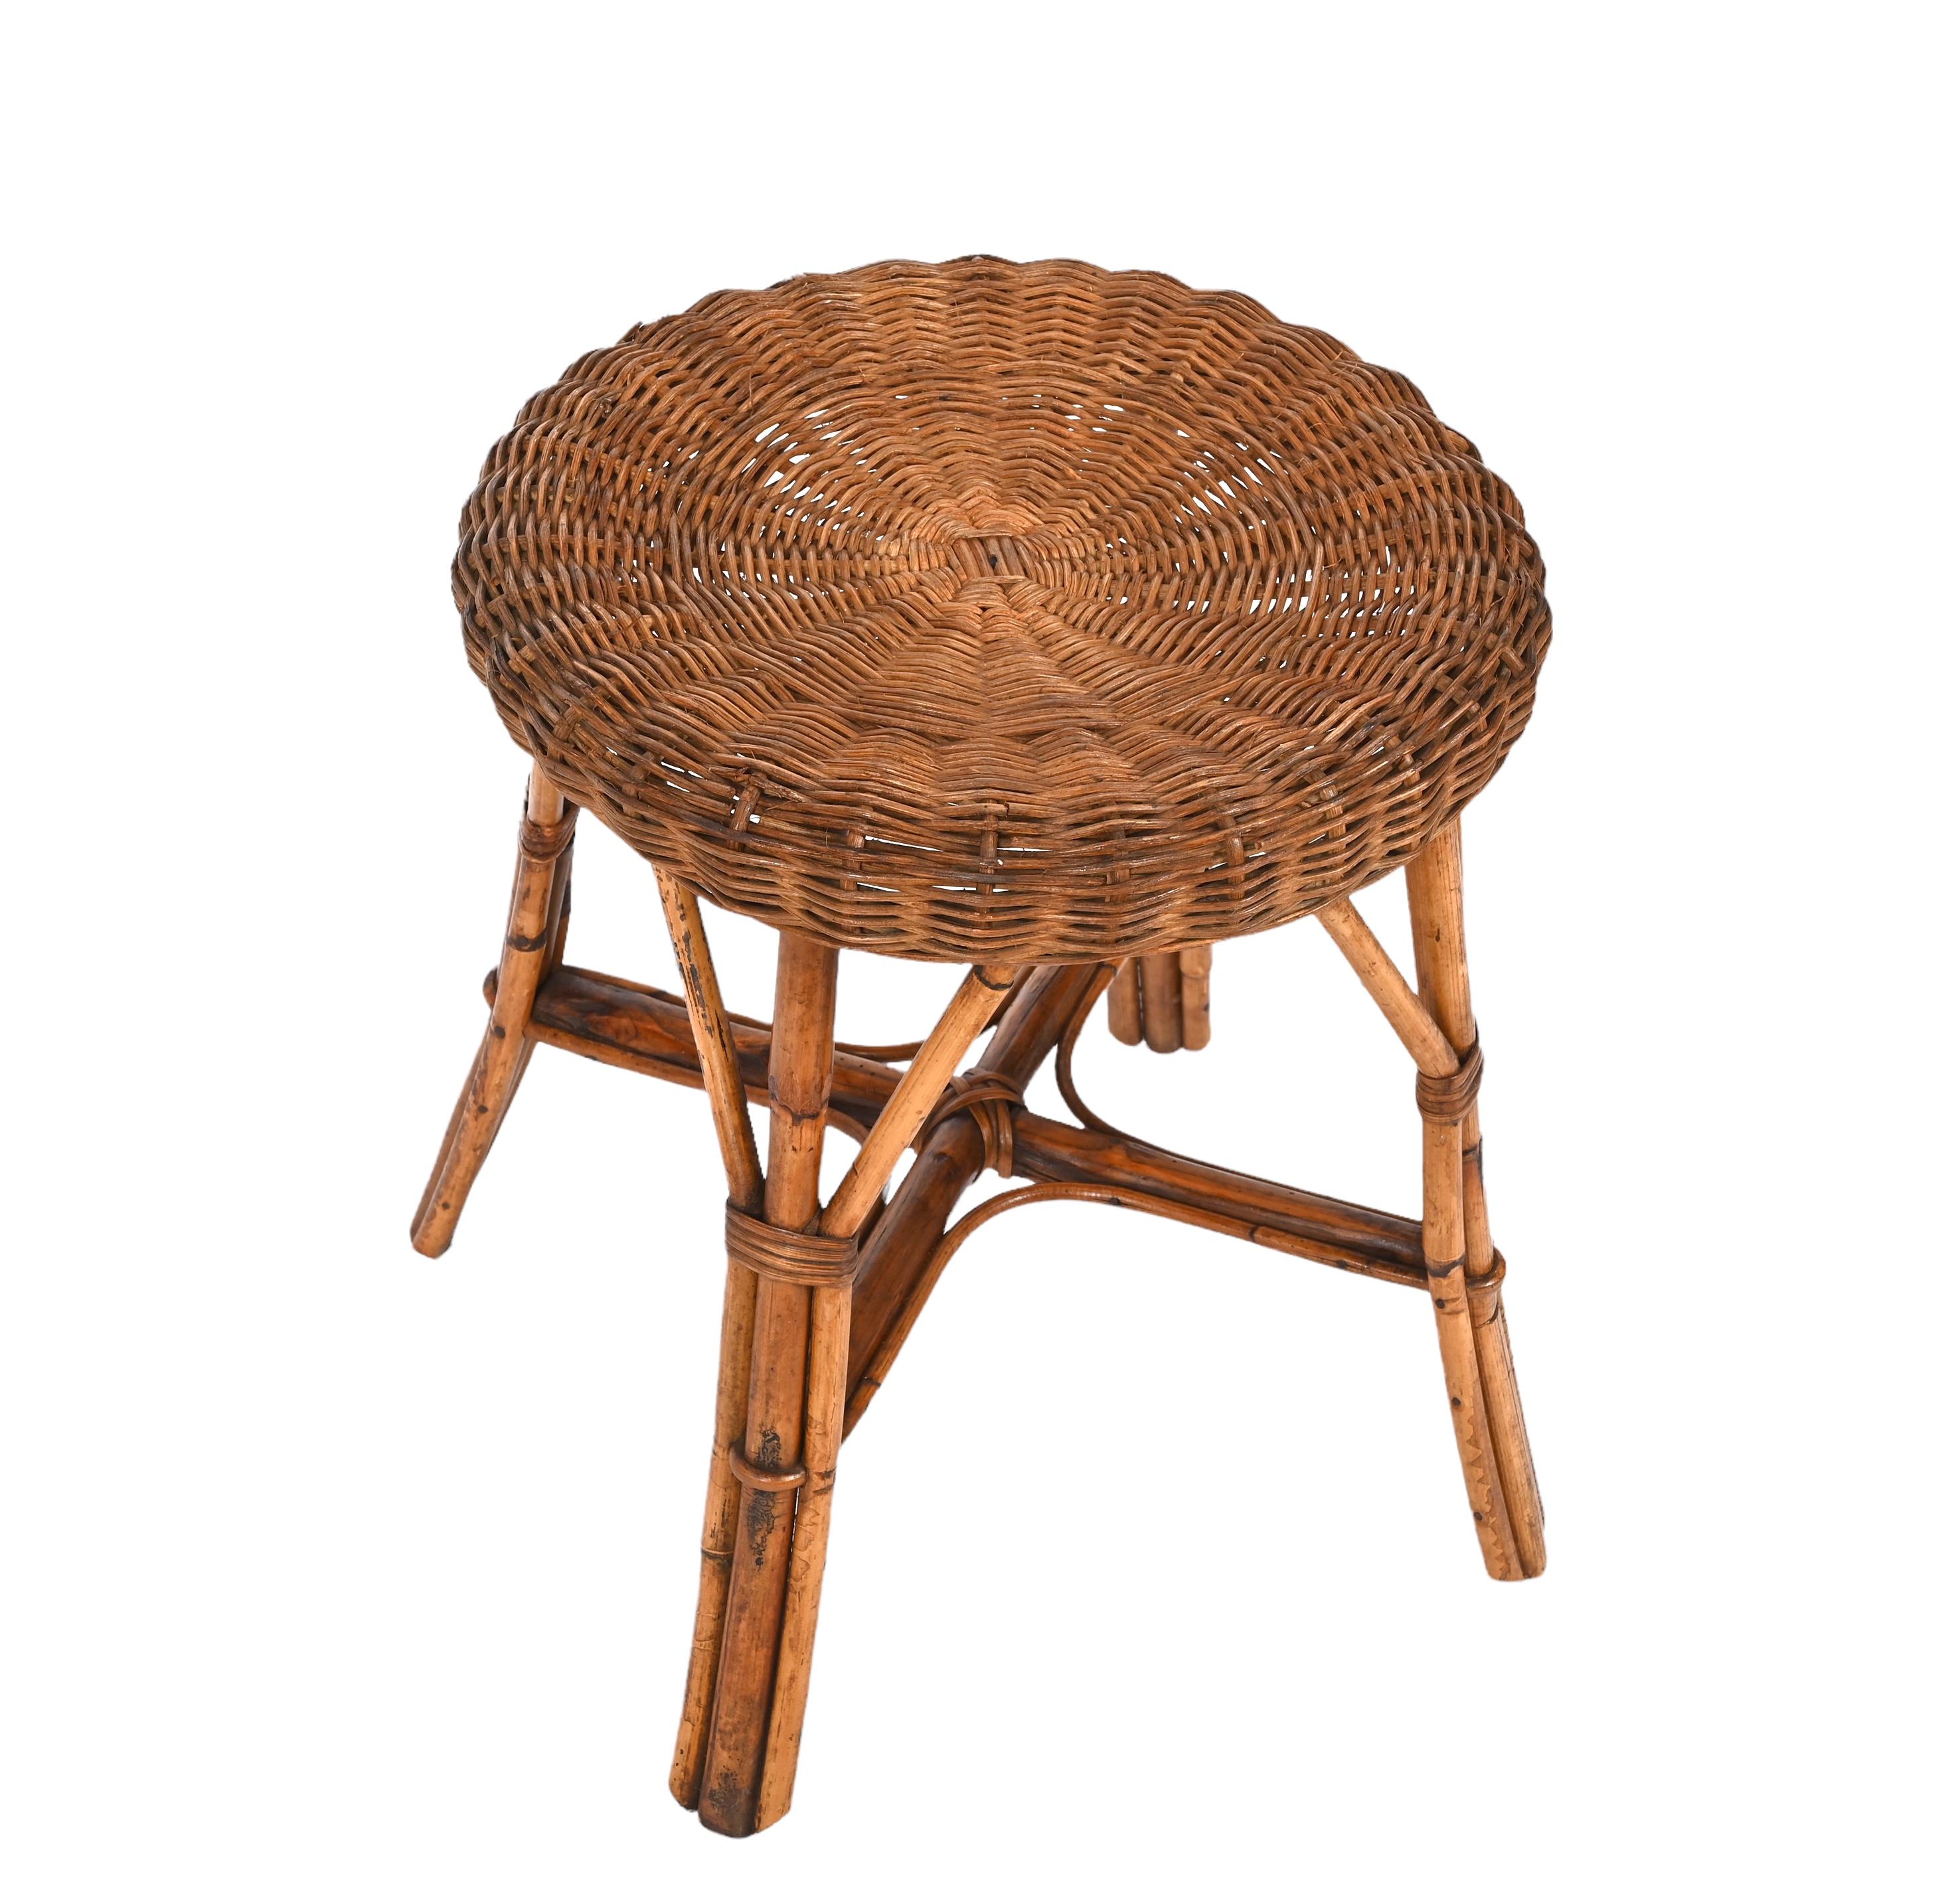 Wicker Mid-Century French Riviera Rattan and Bamboo Wires Italian Stool, 1960s